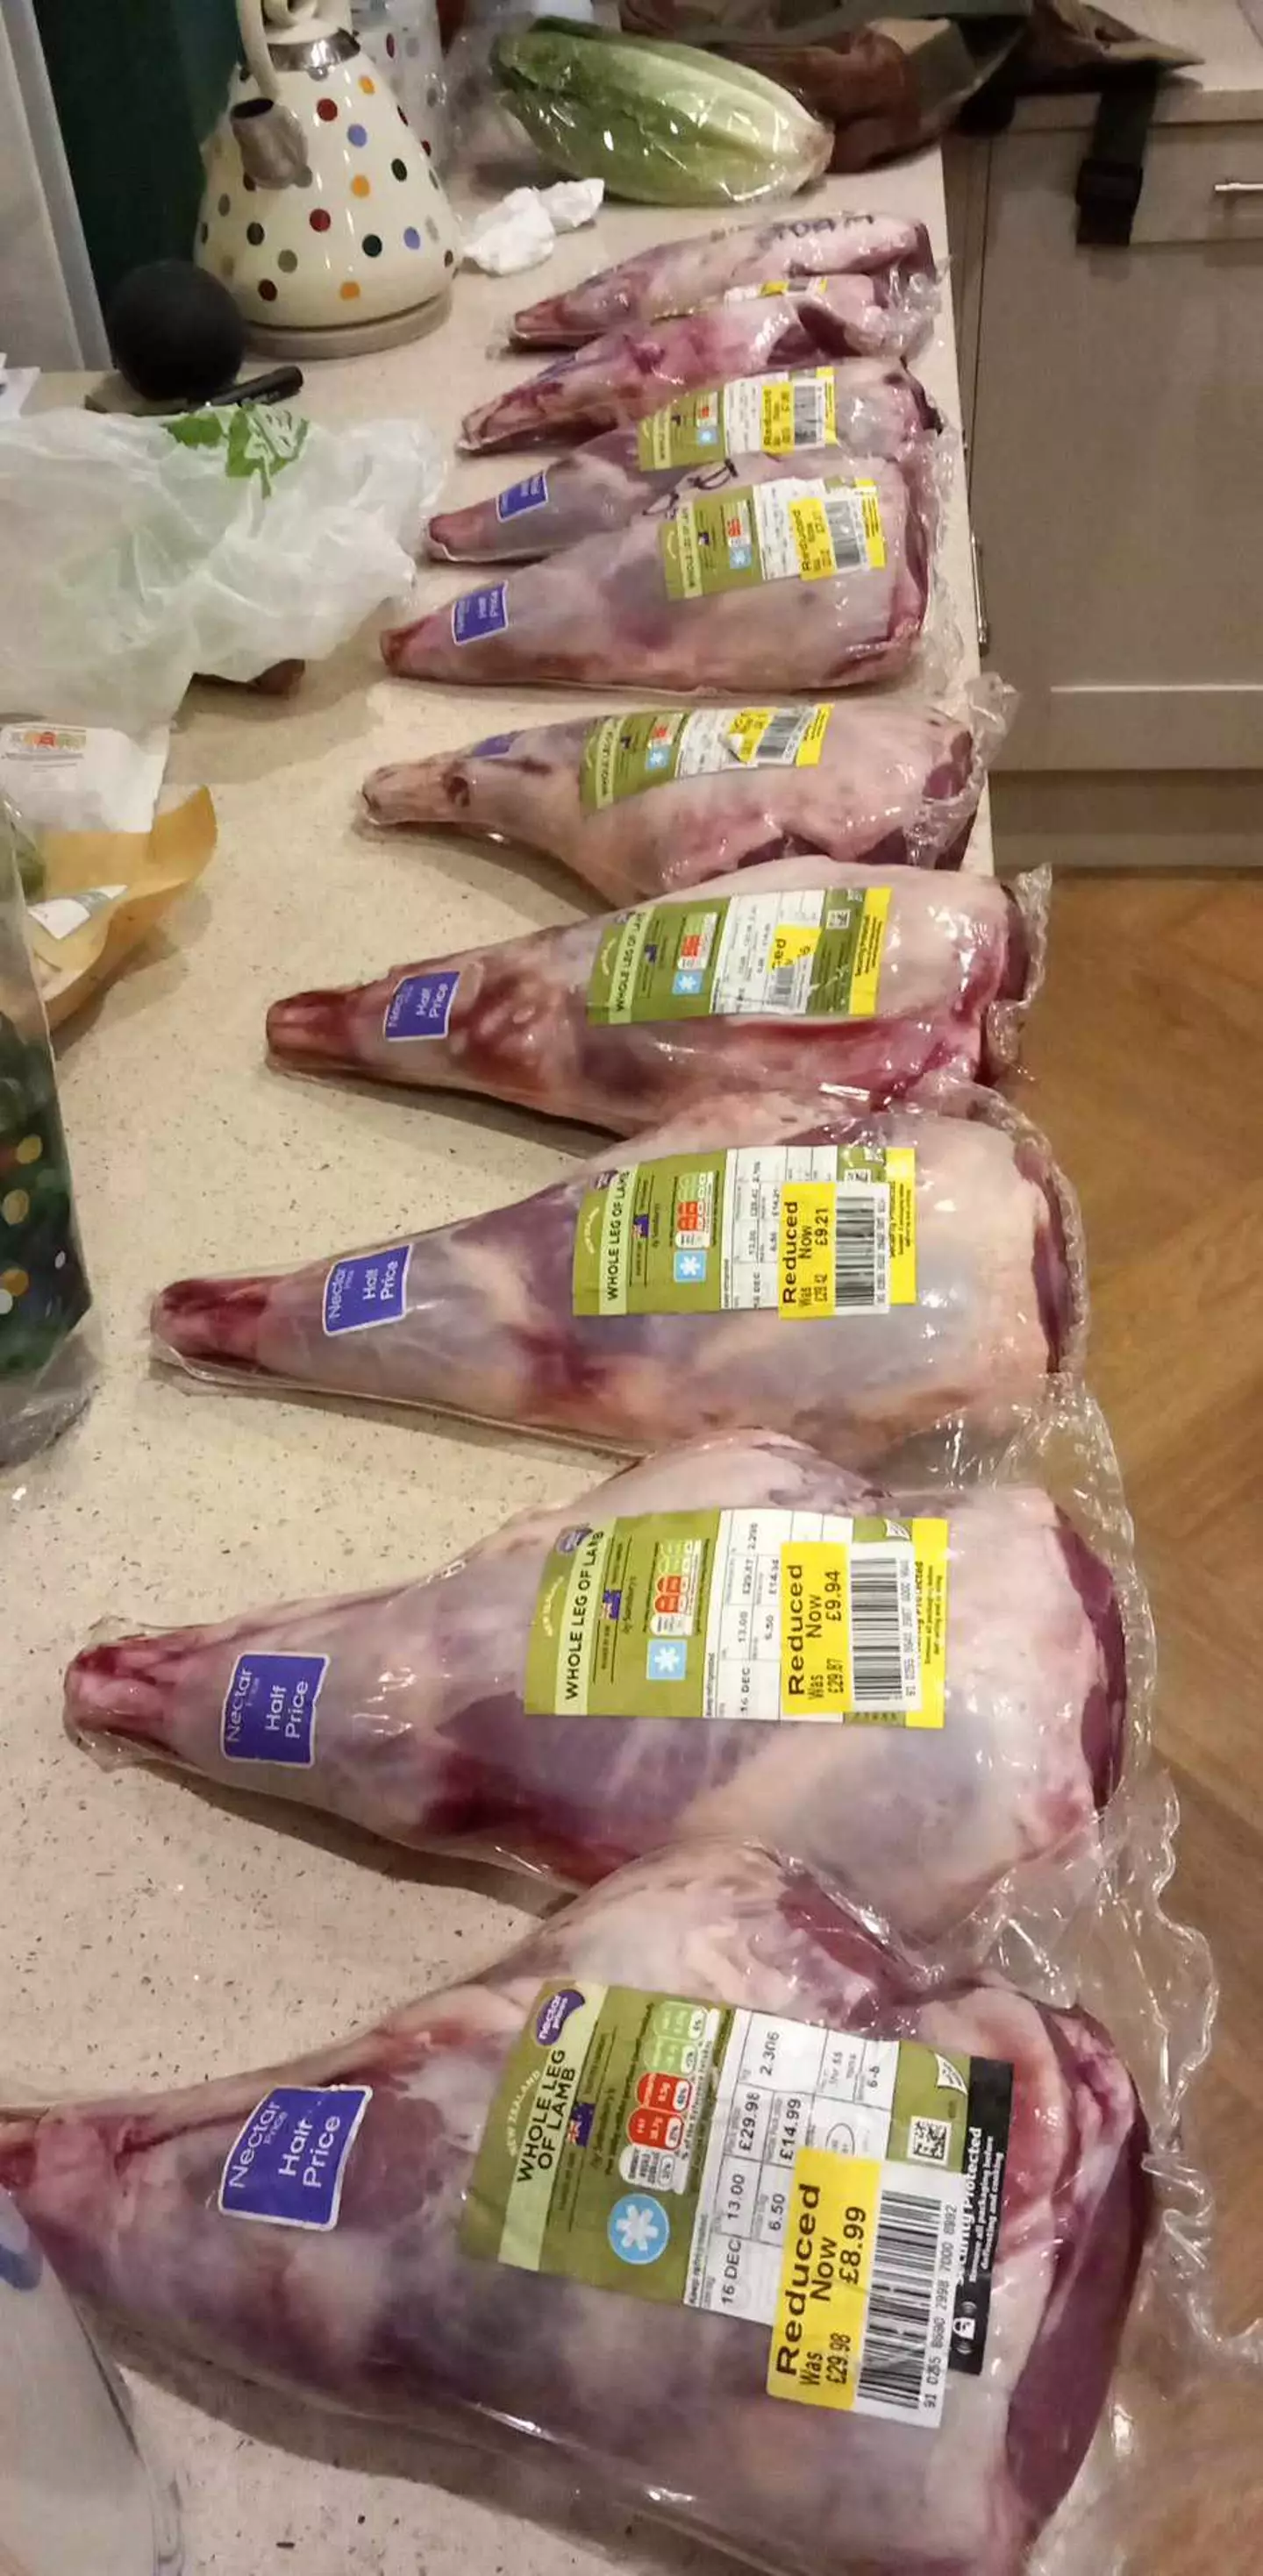 The social media user issued a further update to prove that all the lamb legs were on sale.